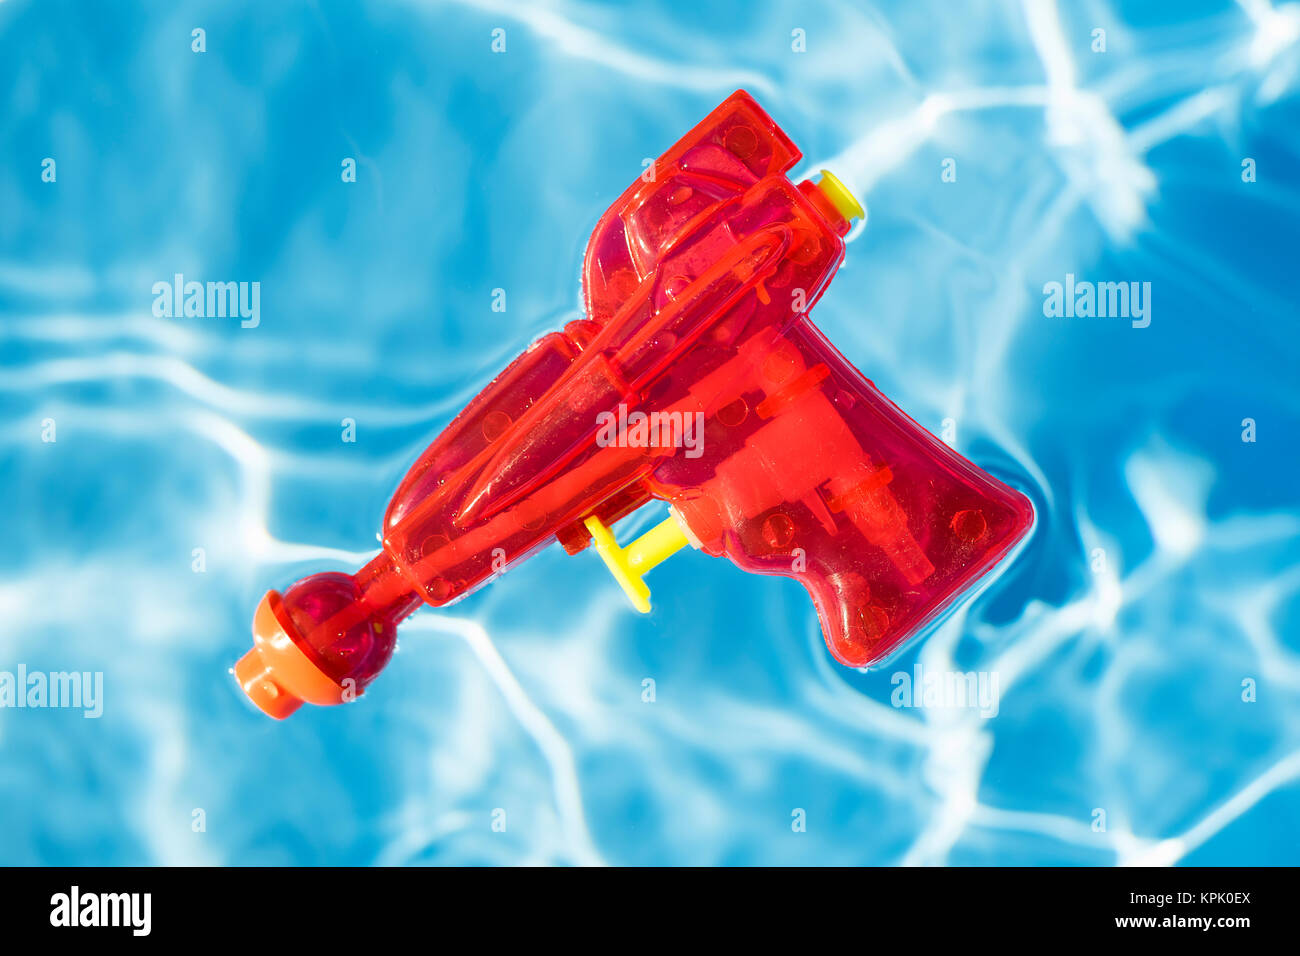 Red squirt gun floating in water. Stock Photo